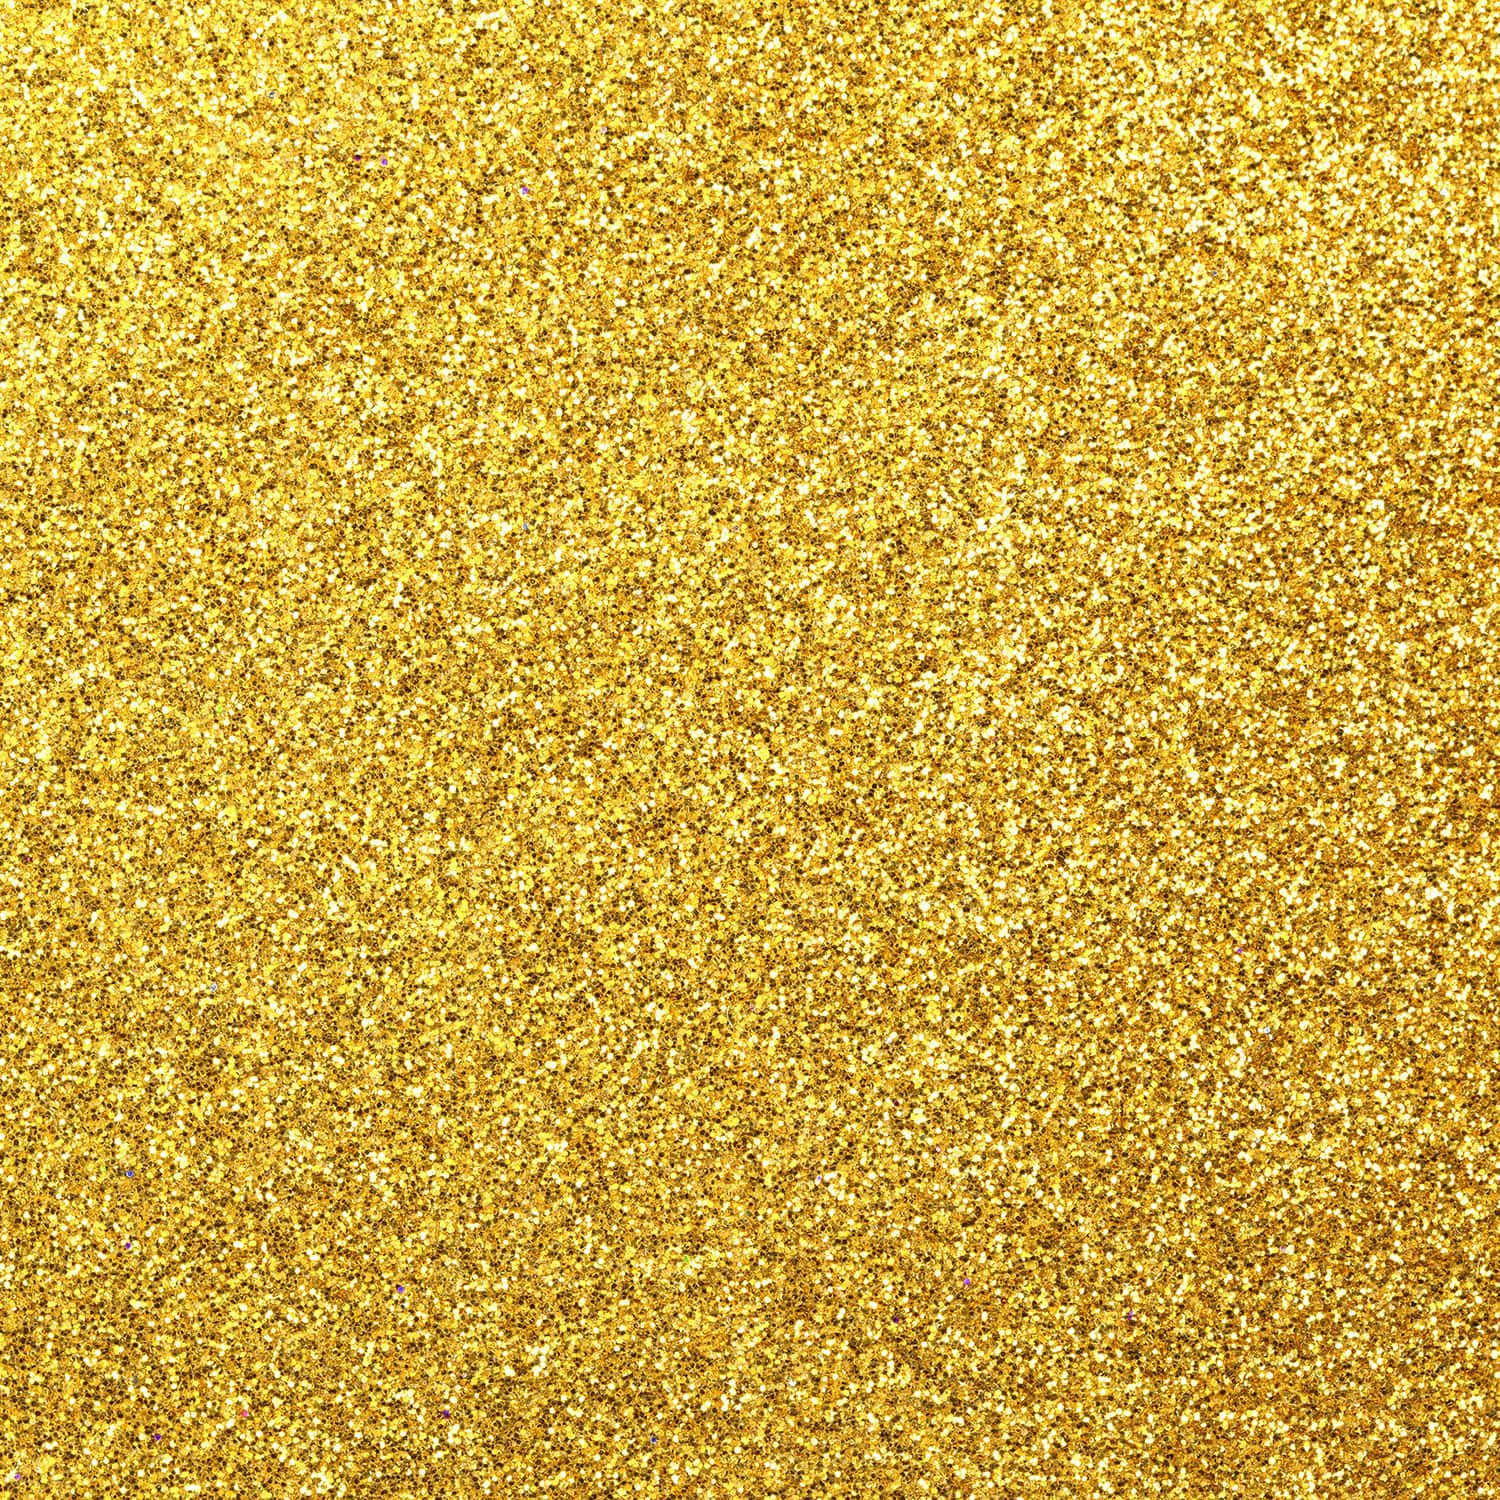 Make a bold statement with a luxurious gold glitter background